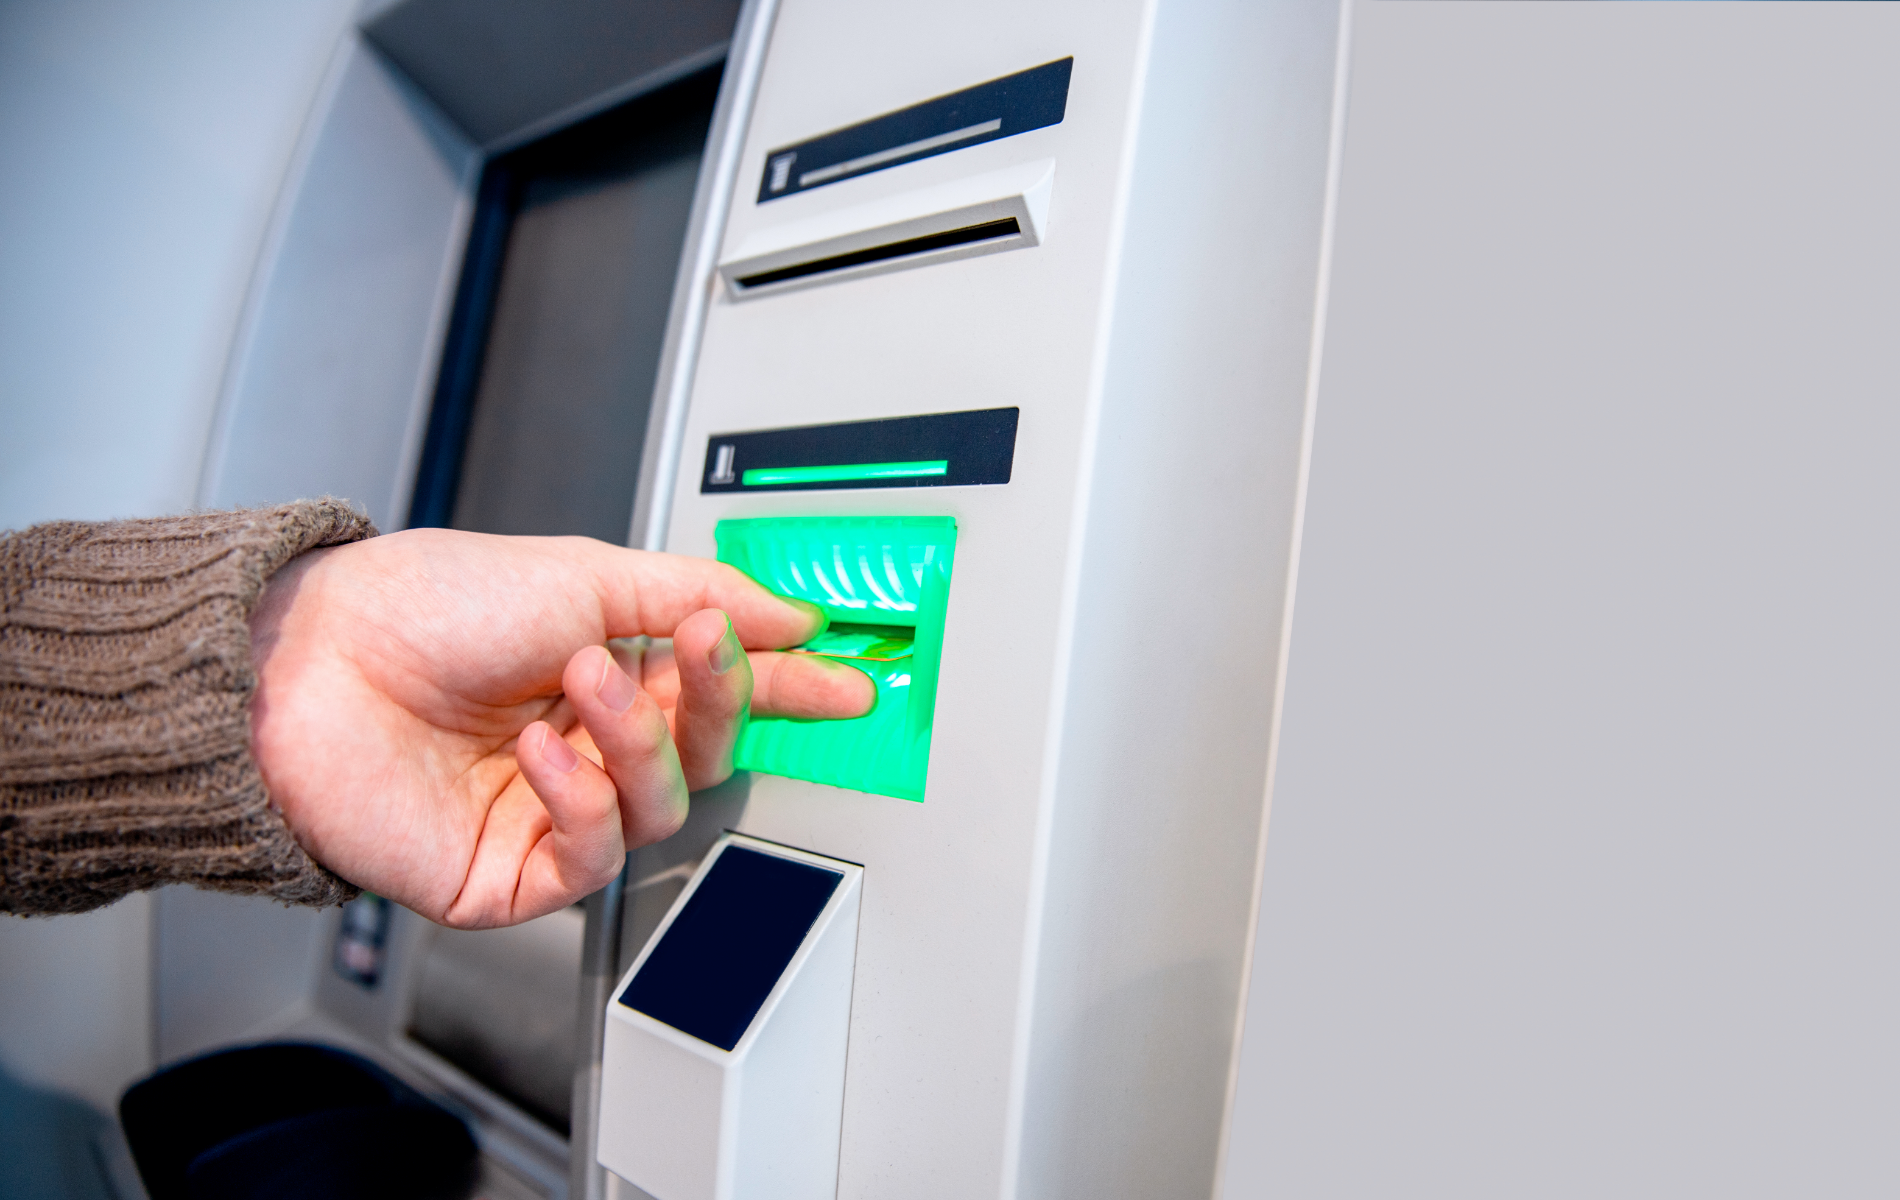 How To Get Cash From a Credit Card at an ATM